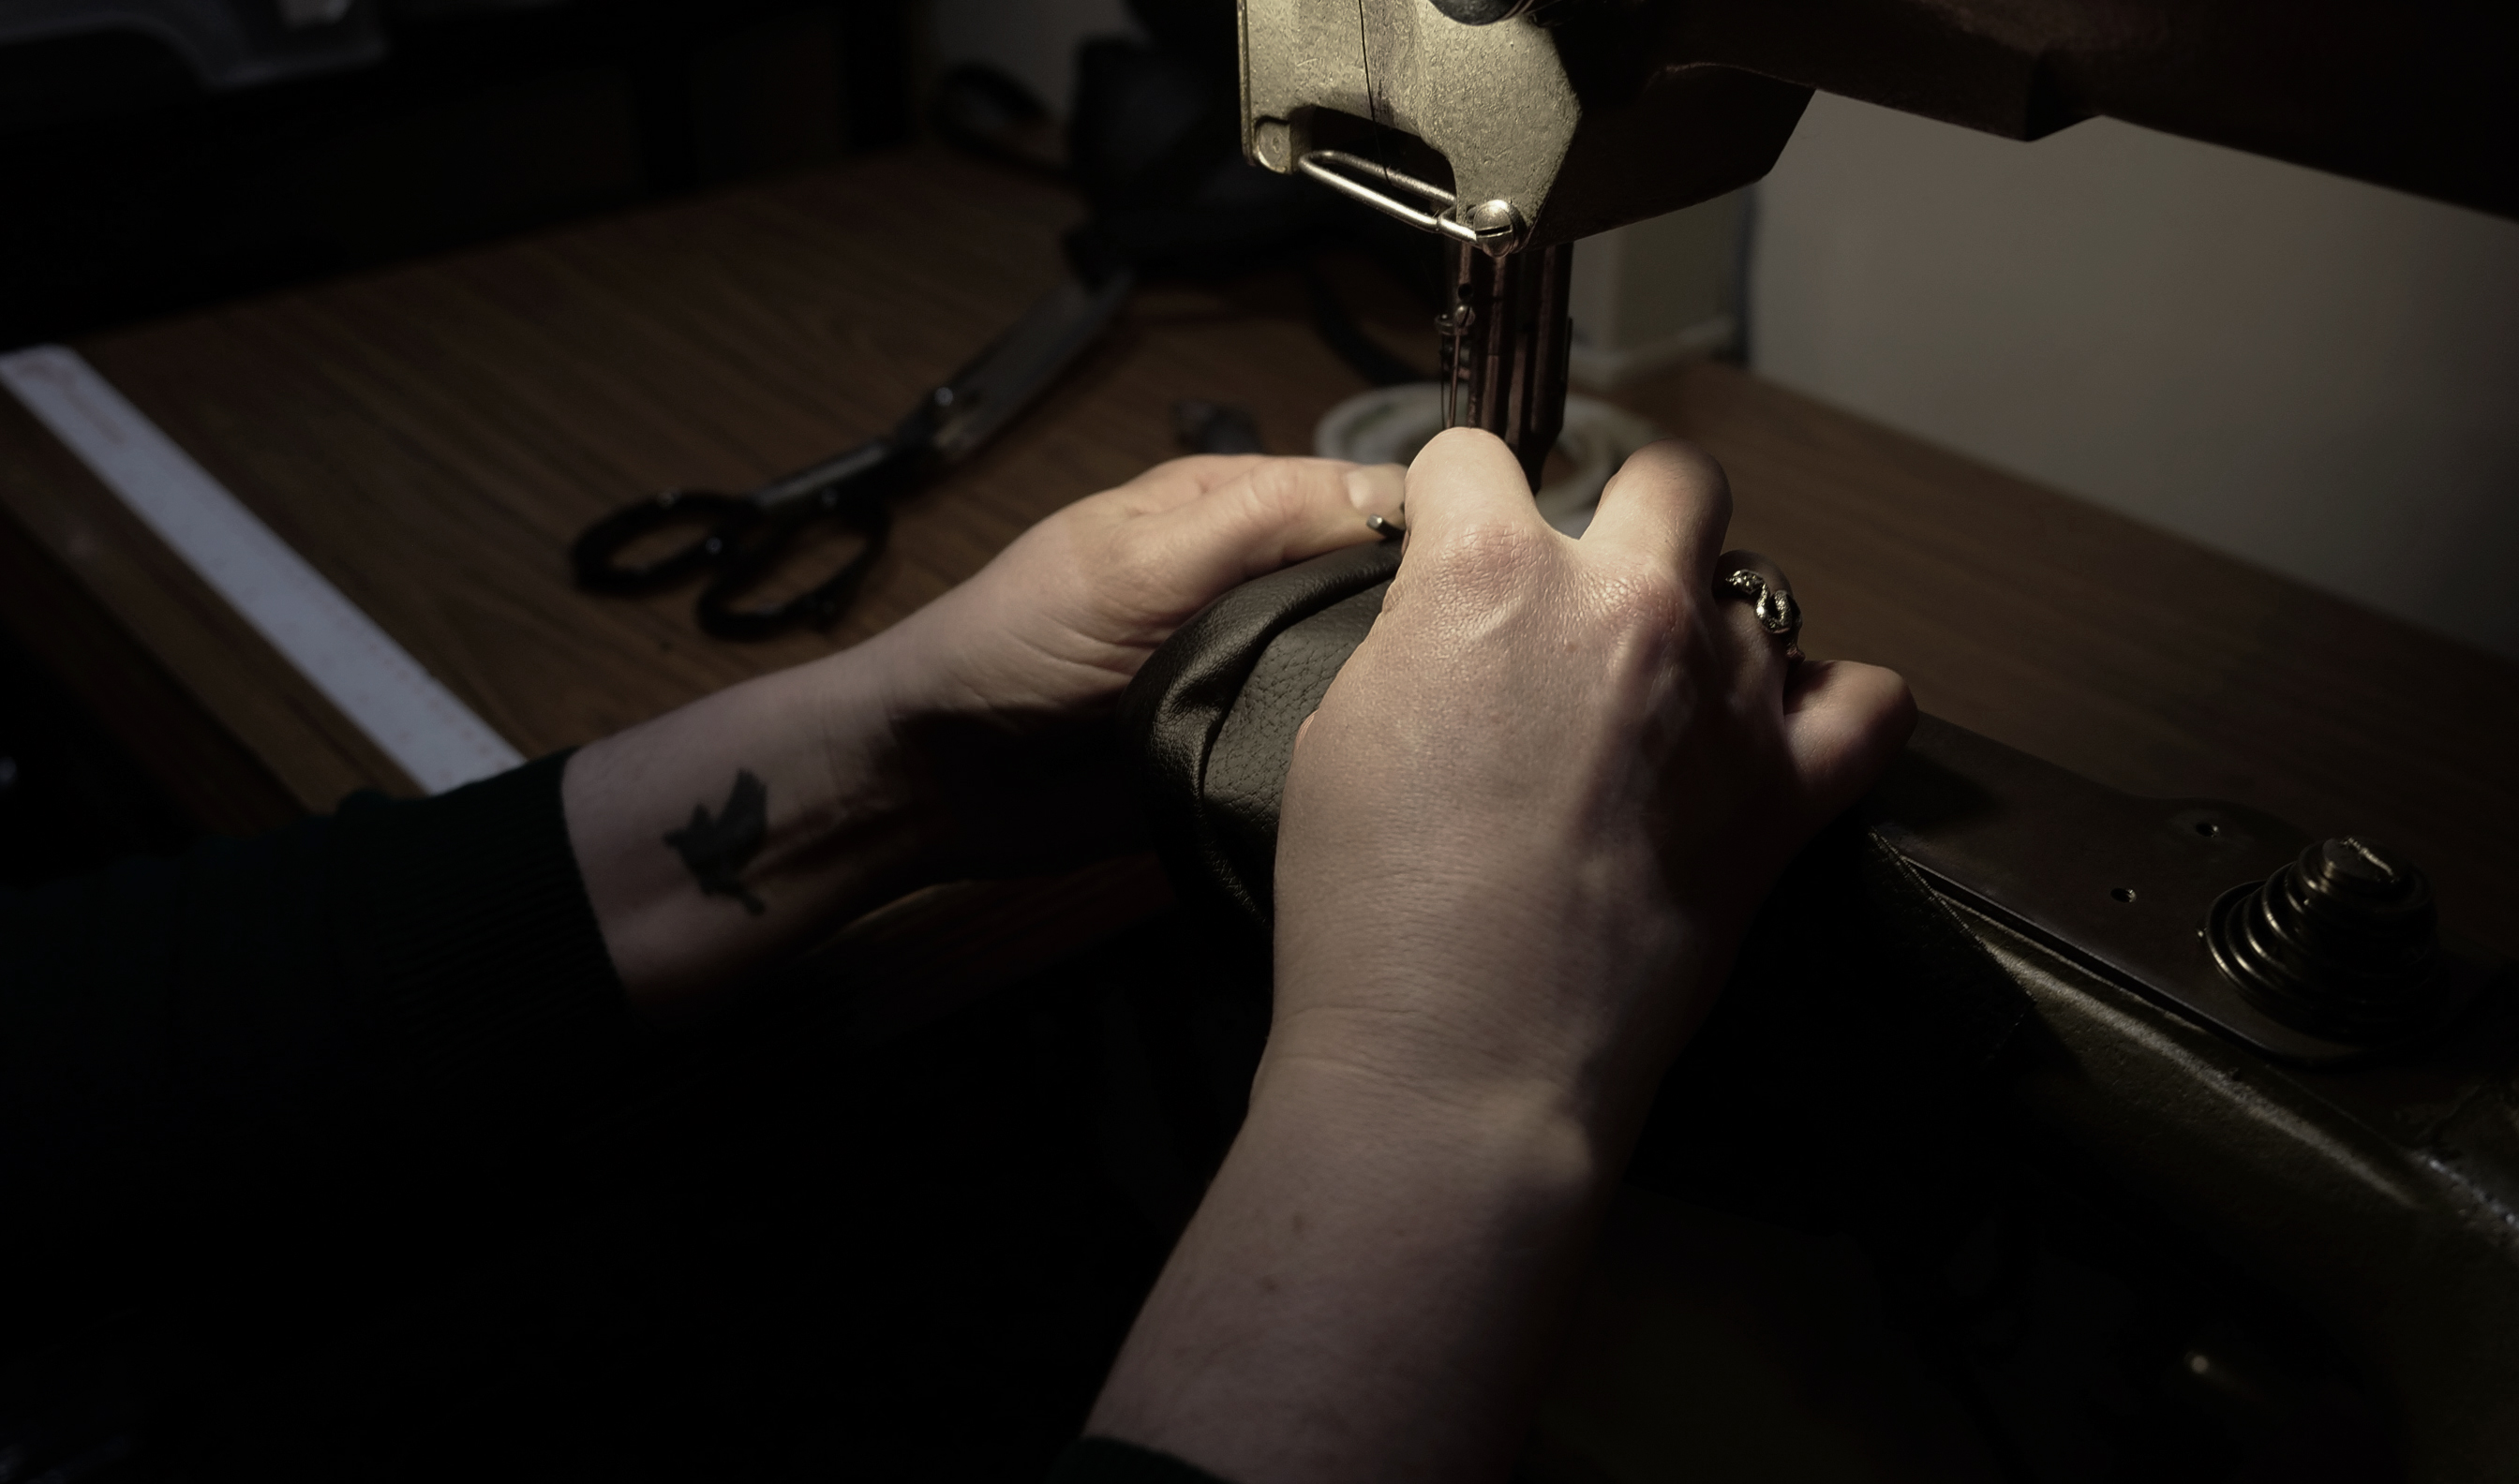 Sewing leather together.